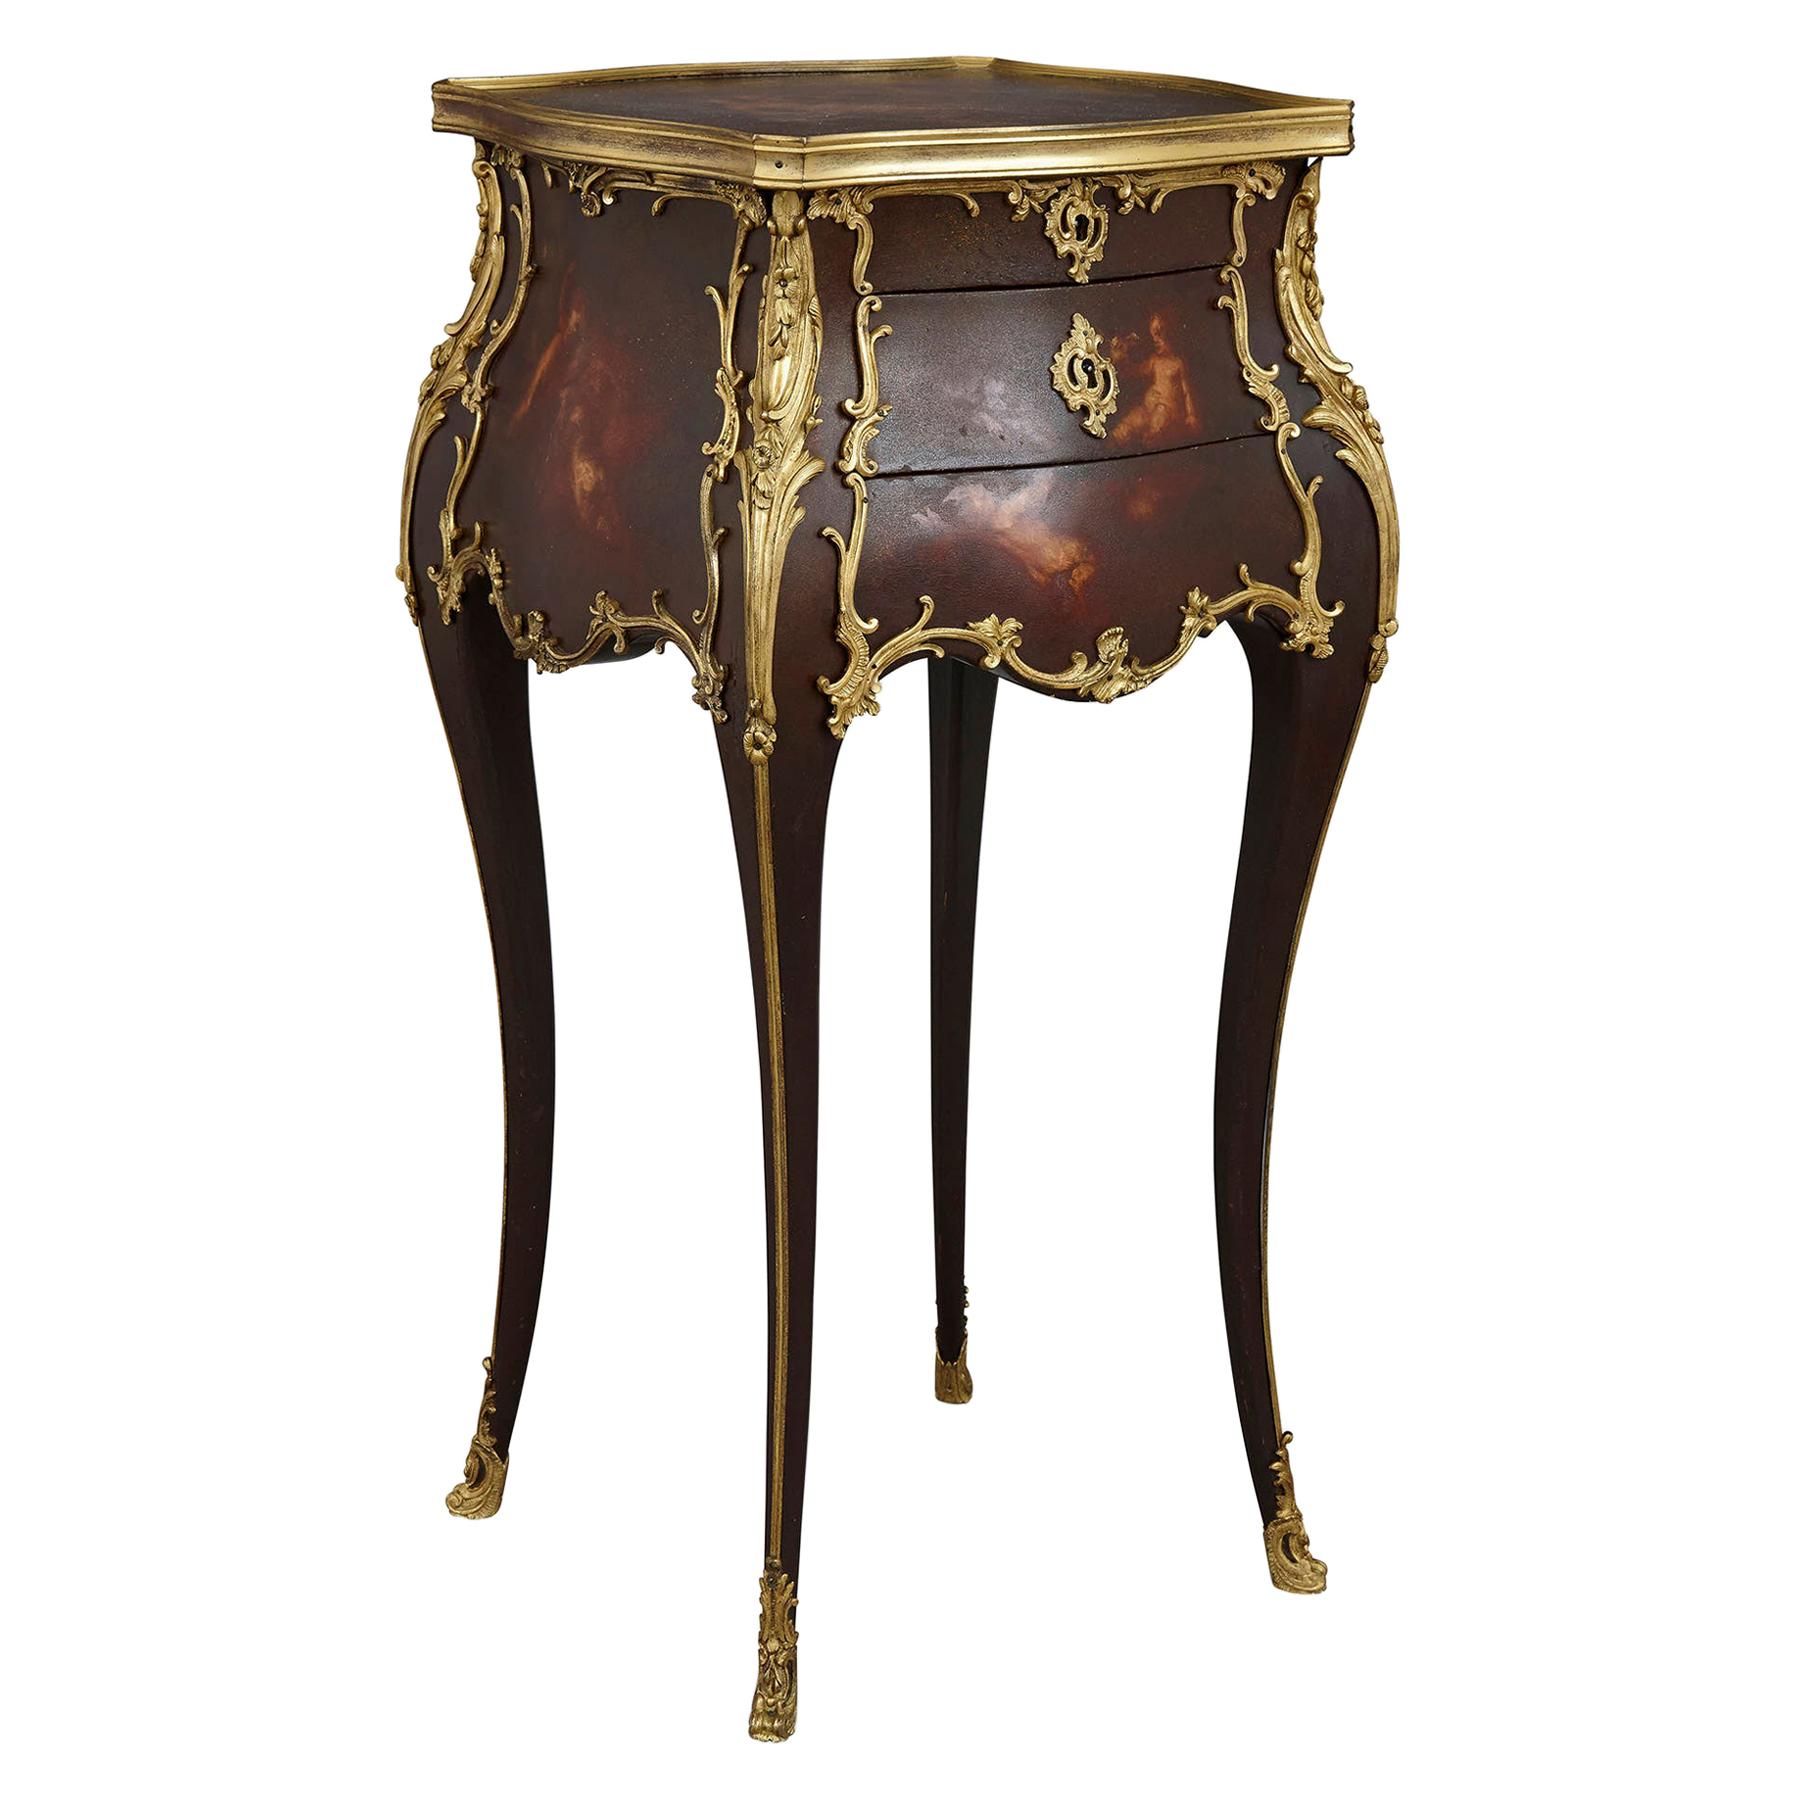 Rococo Style Side Table with Vernis Martin Decoration and Gilt Bronze Mounts